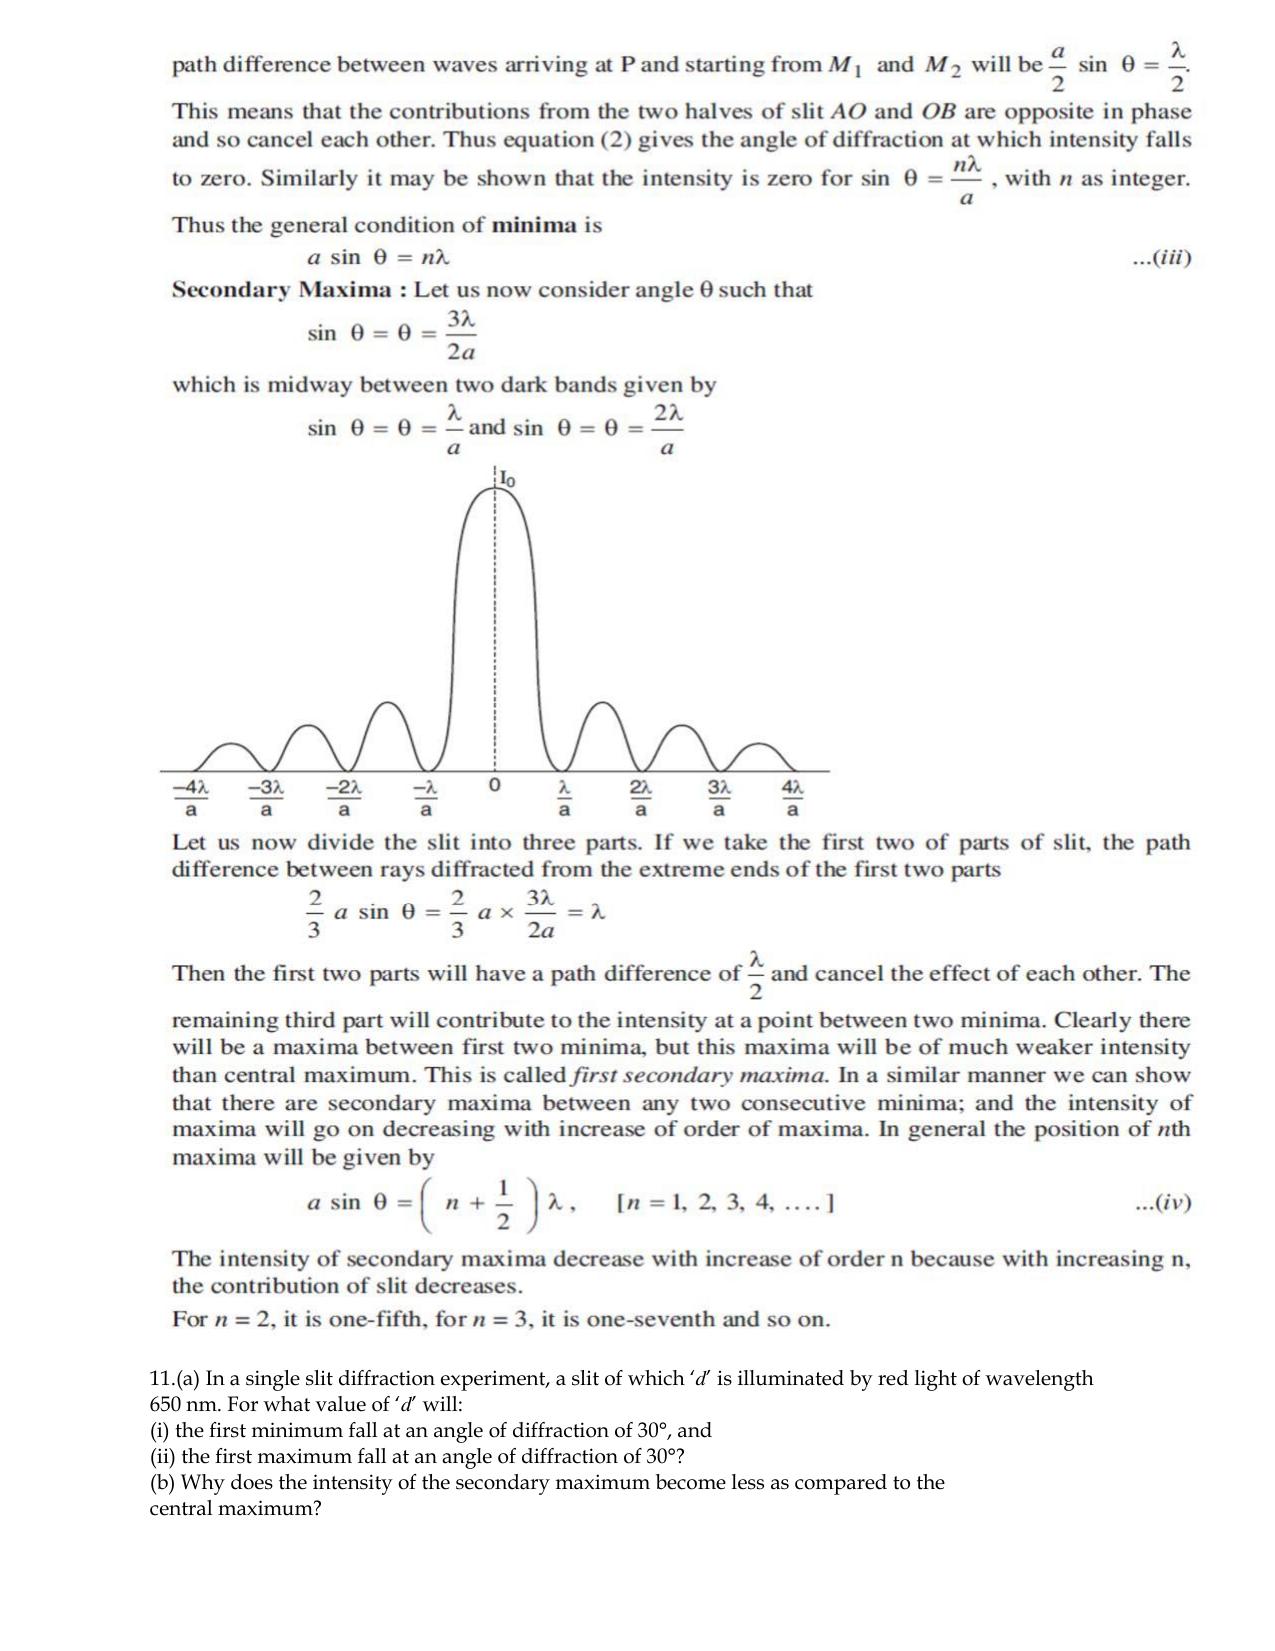 CBSE Class 12 Physics Worksheets for Optics - Page 19